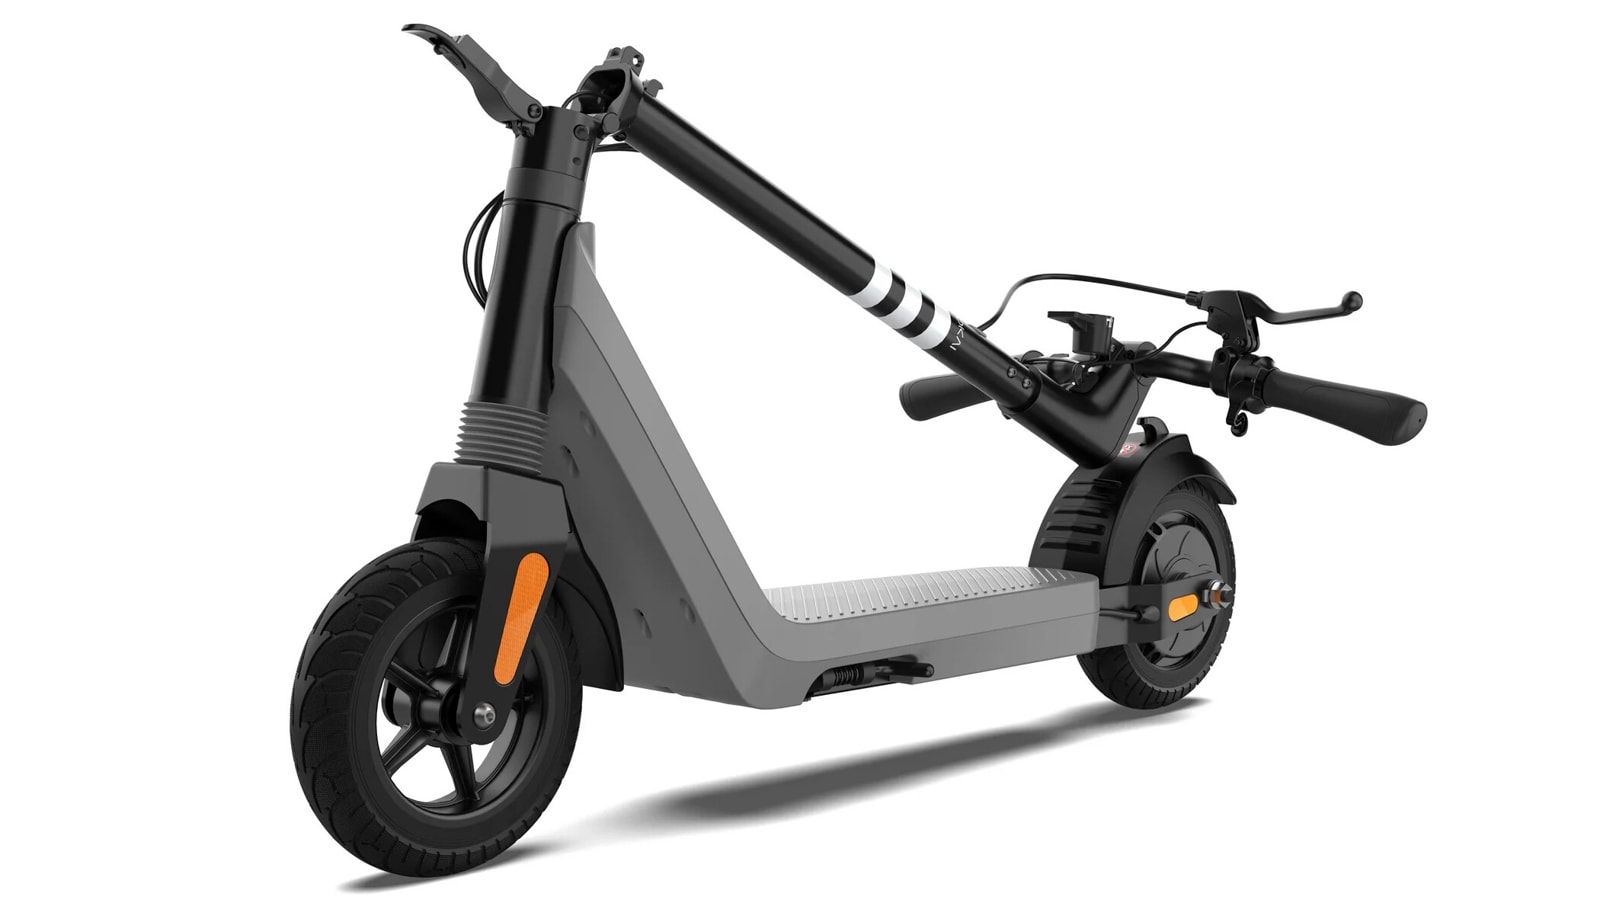 OKAI Zippy ES51 Lightweight Electric Scooter Offers 1-Click Folding for Effortless Portability